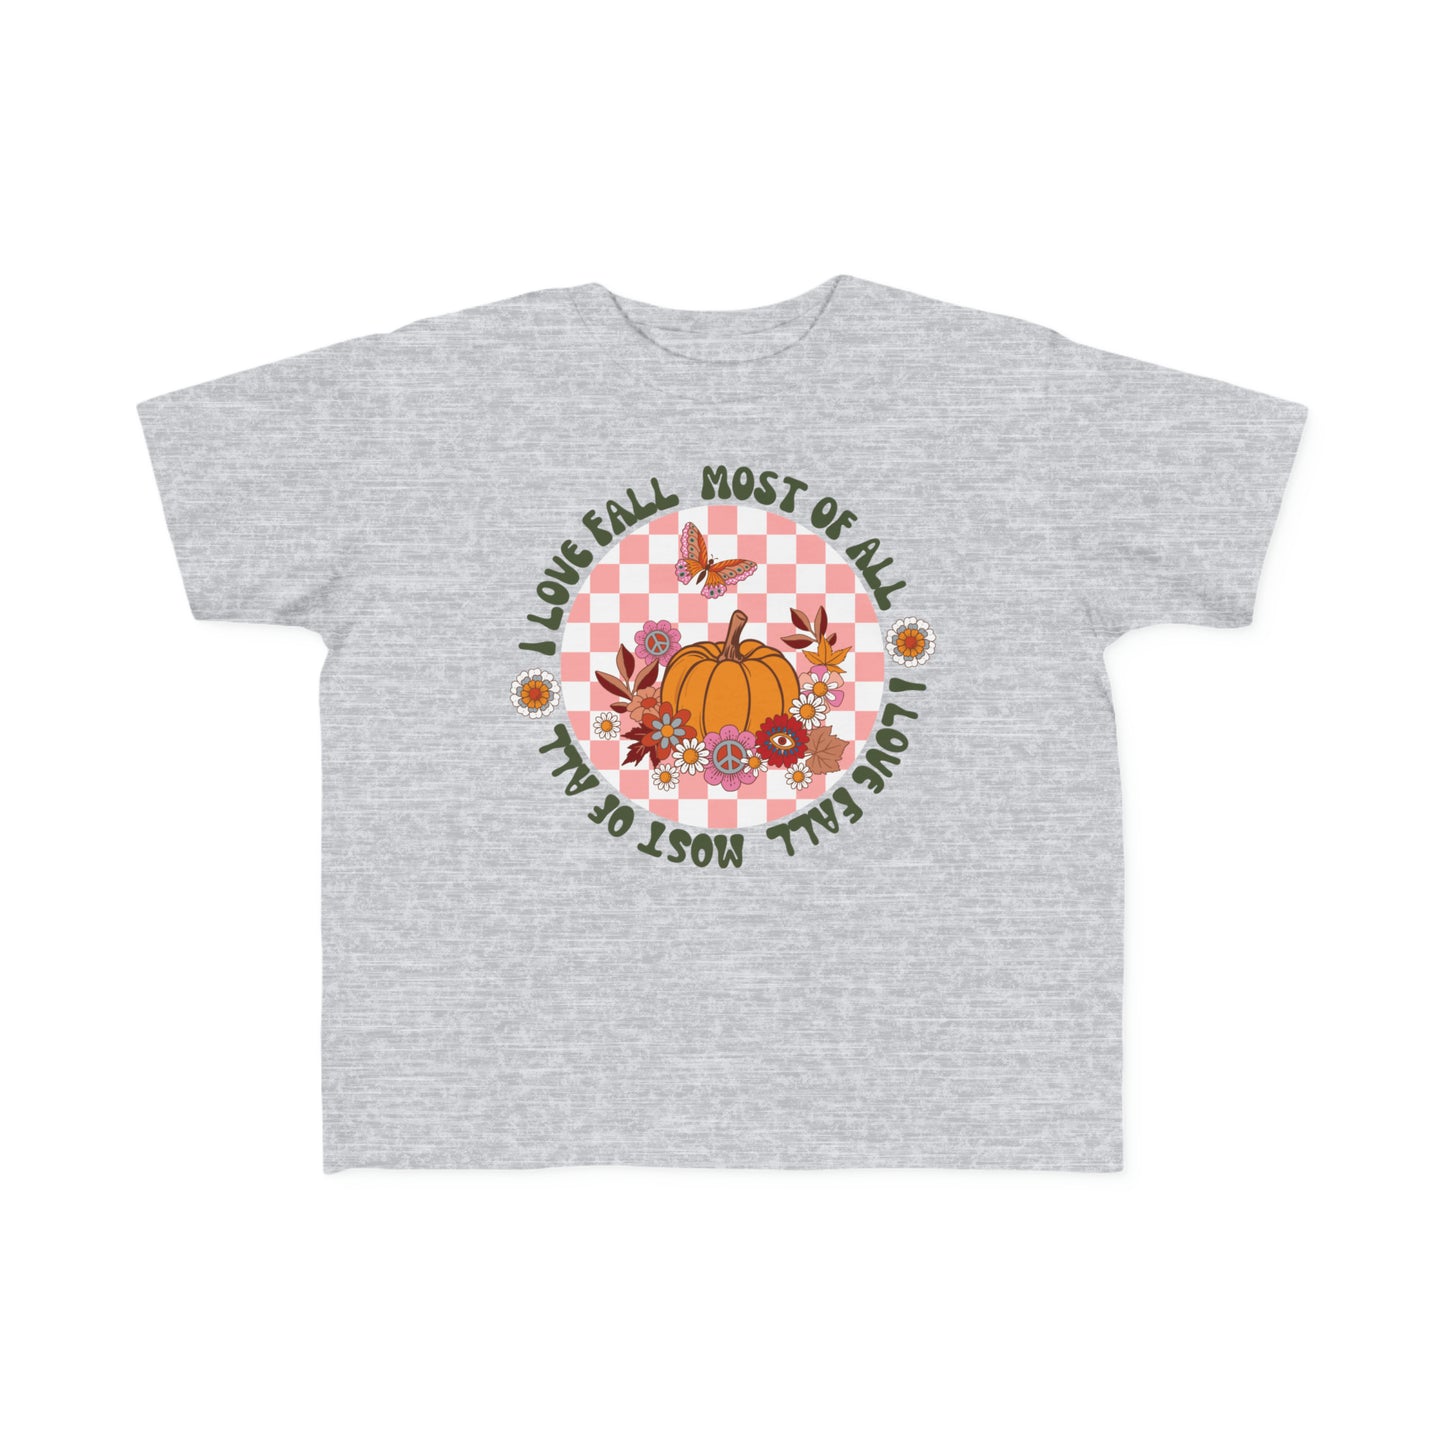 I Love Fall Most of All  Toddler's Fine Jersey Tee